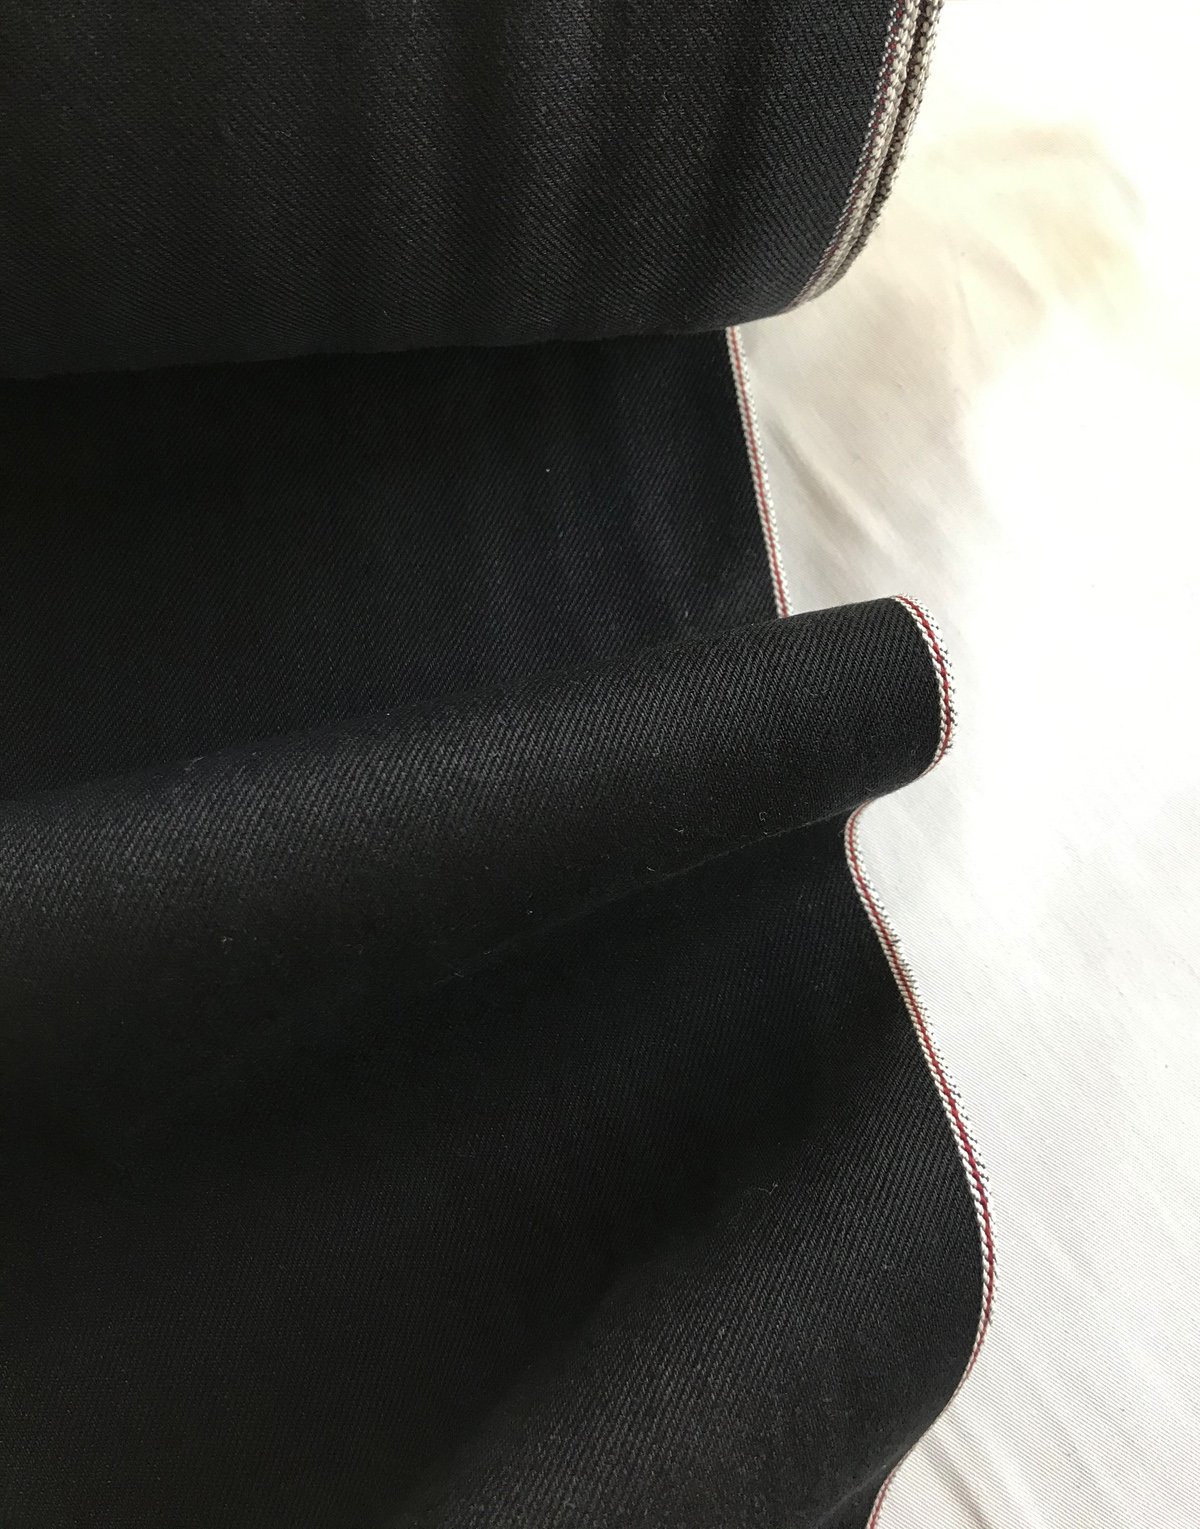 Fabric for Casual Active wear and Intimate dressing — L'Etoffe Fabrics ...